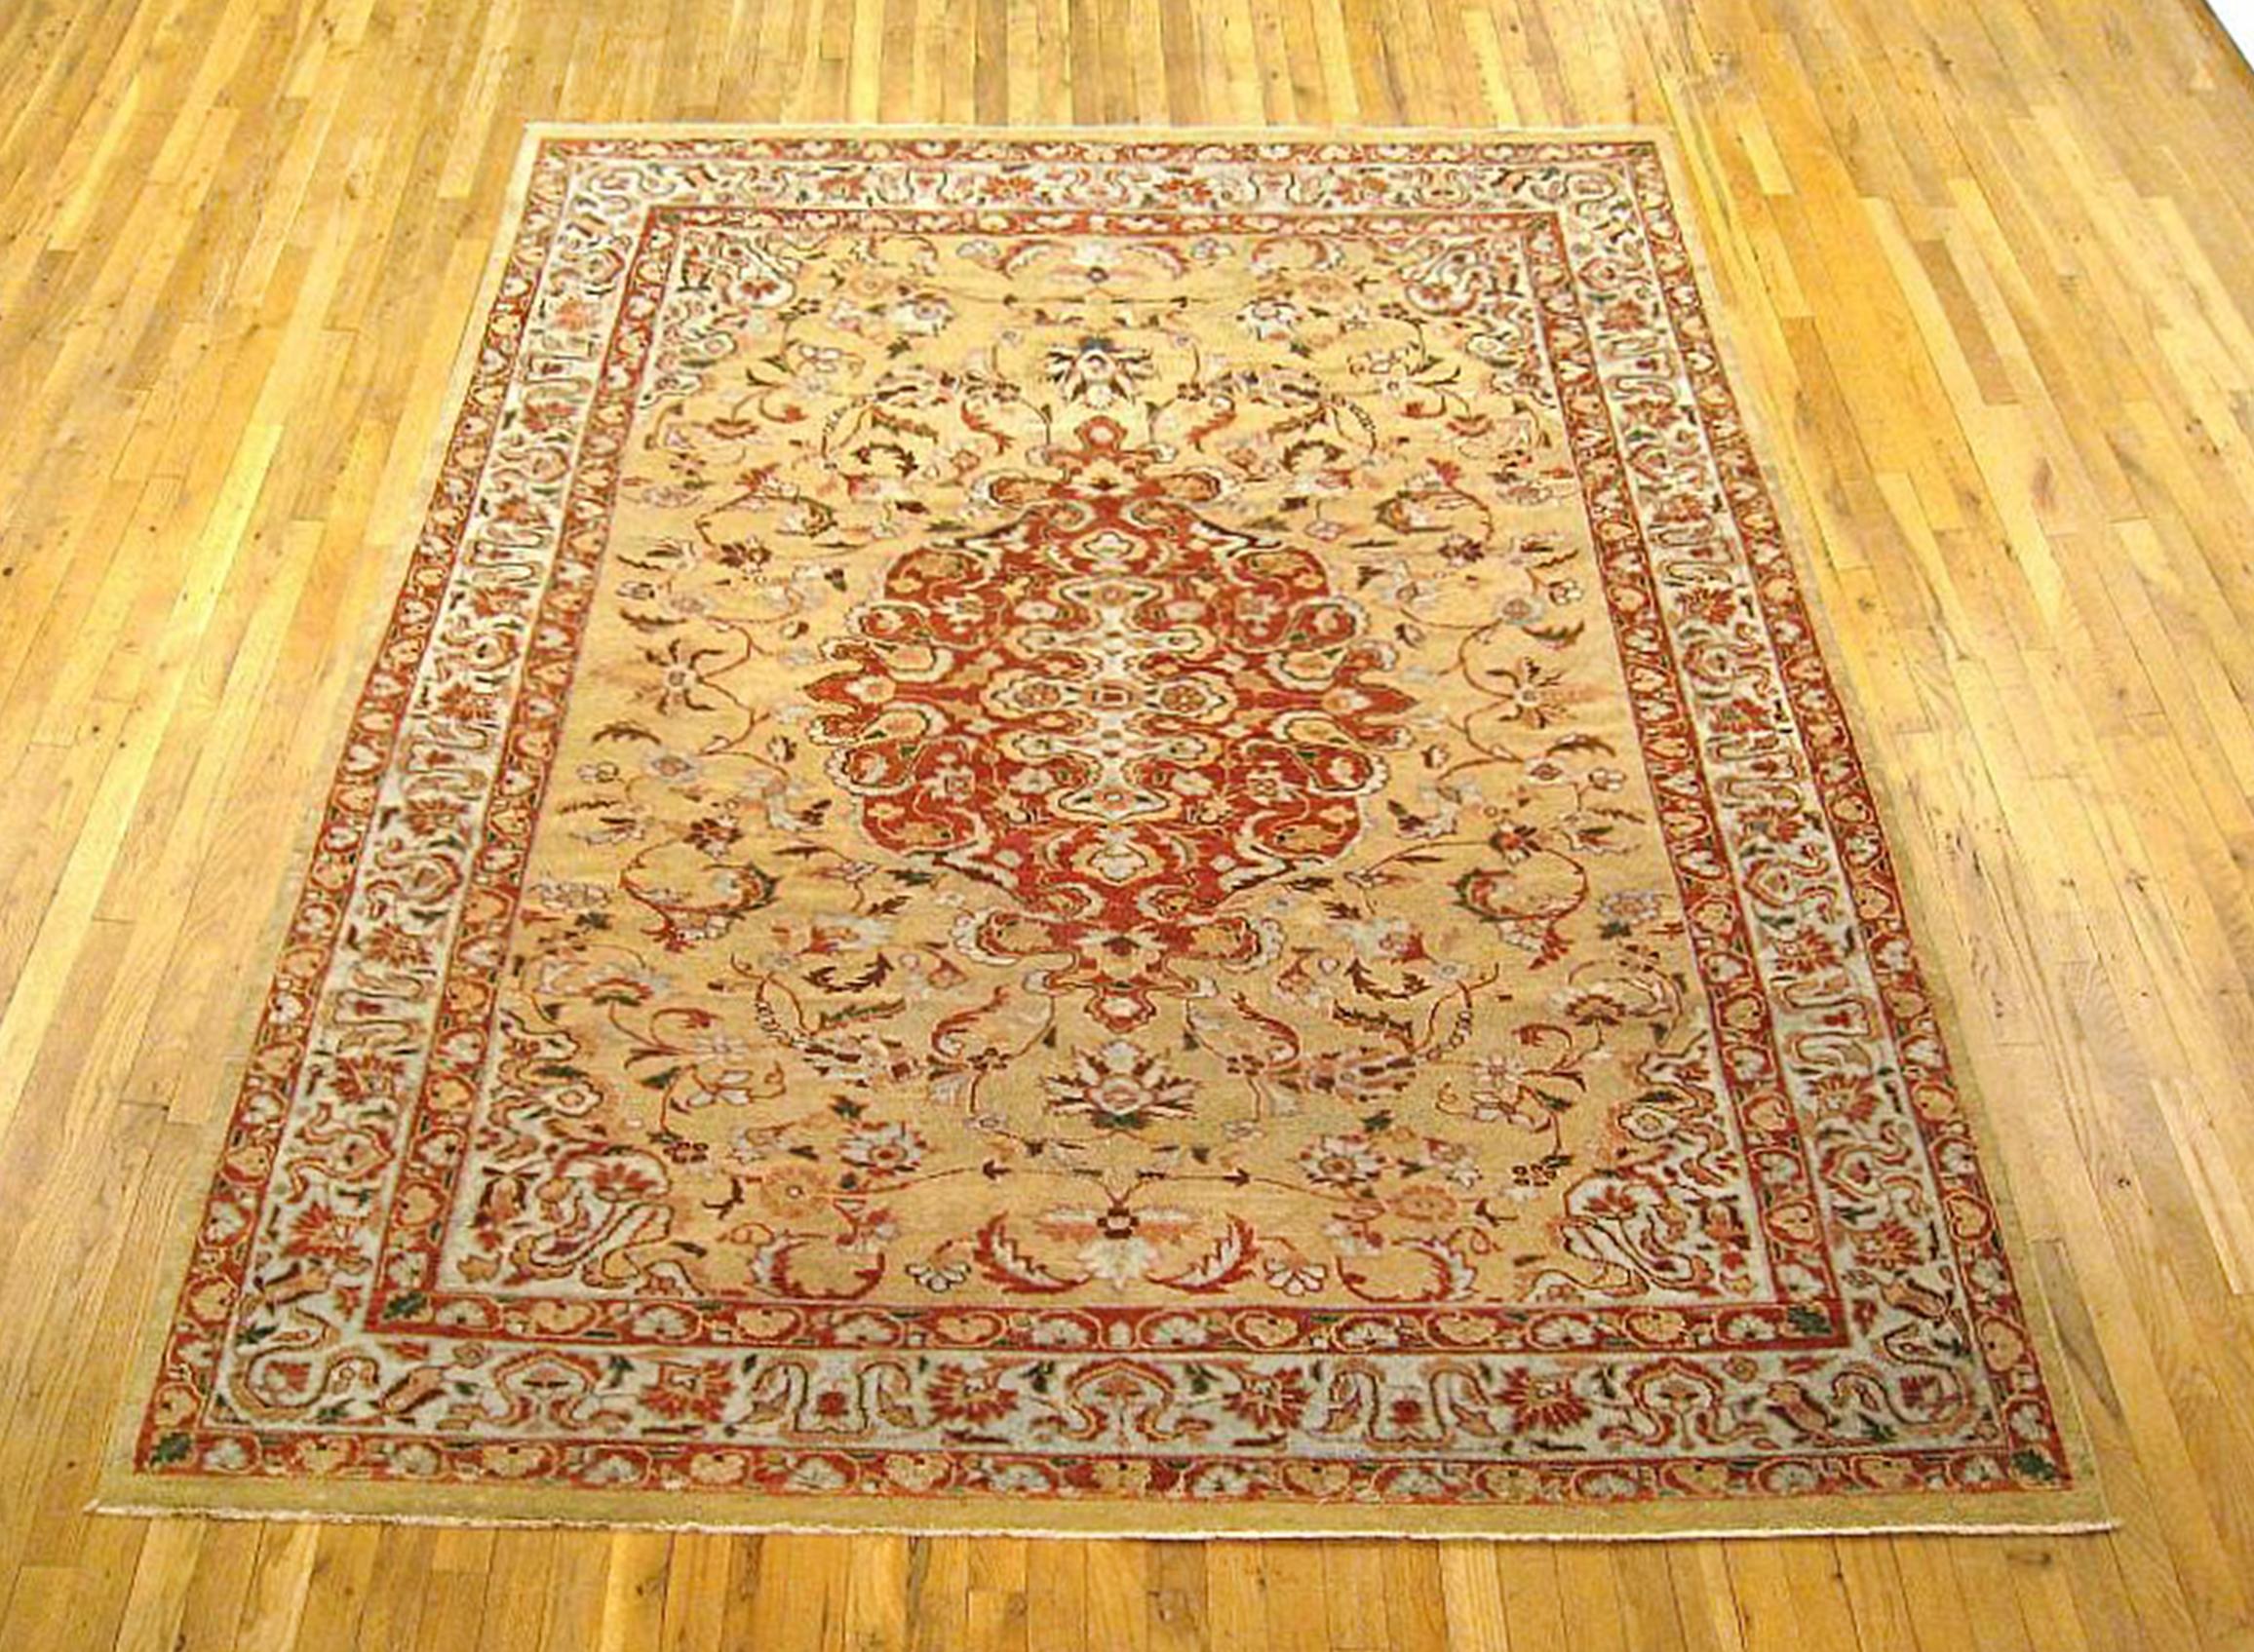 Antique Persian Sultanabad rug, room size, circa 1910.

A one-of-a-kind antique Persian Sultanabad oriental carpet with a thick and lustrous wool pile, knotted by hand, with soft touch and great resistance to wear. This carpet features a central